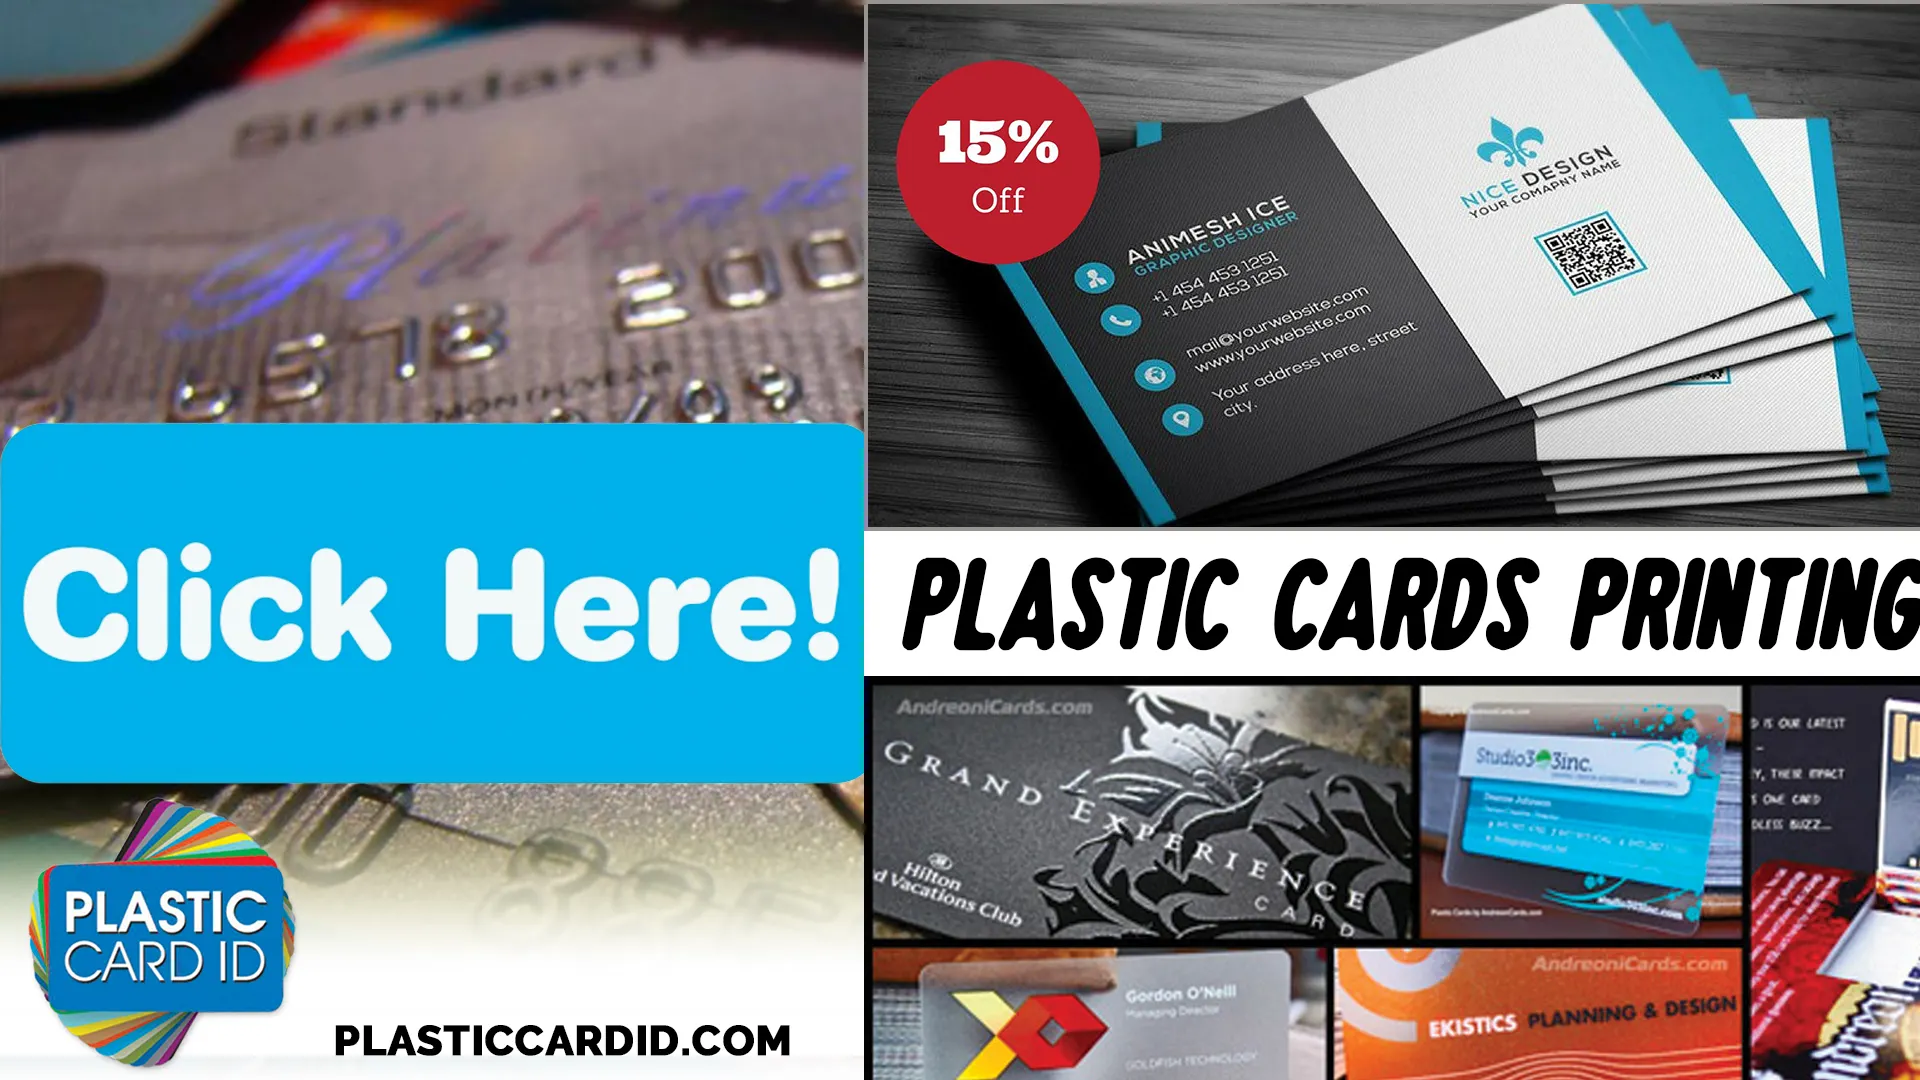 The Complete Card Printing Solution at Plastic Card ID




